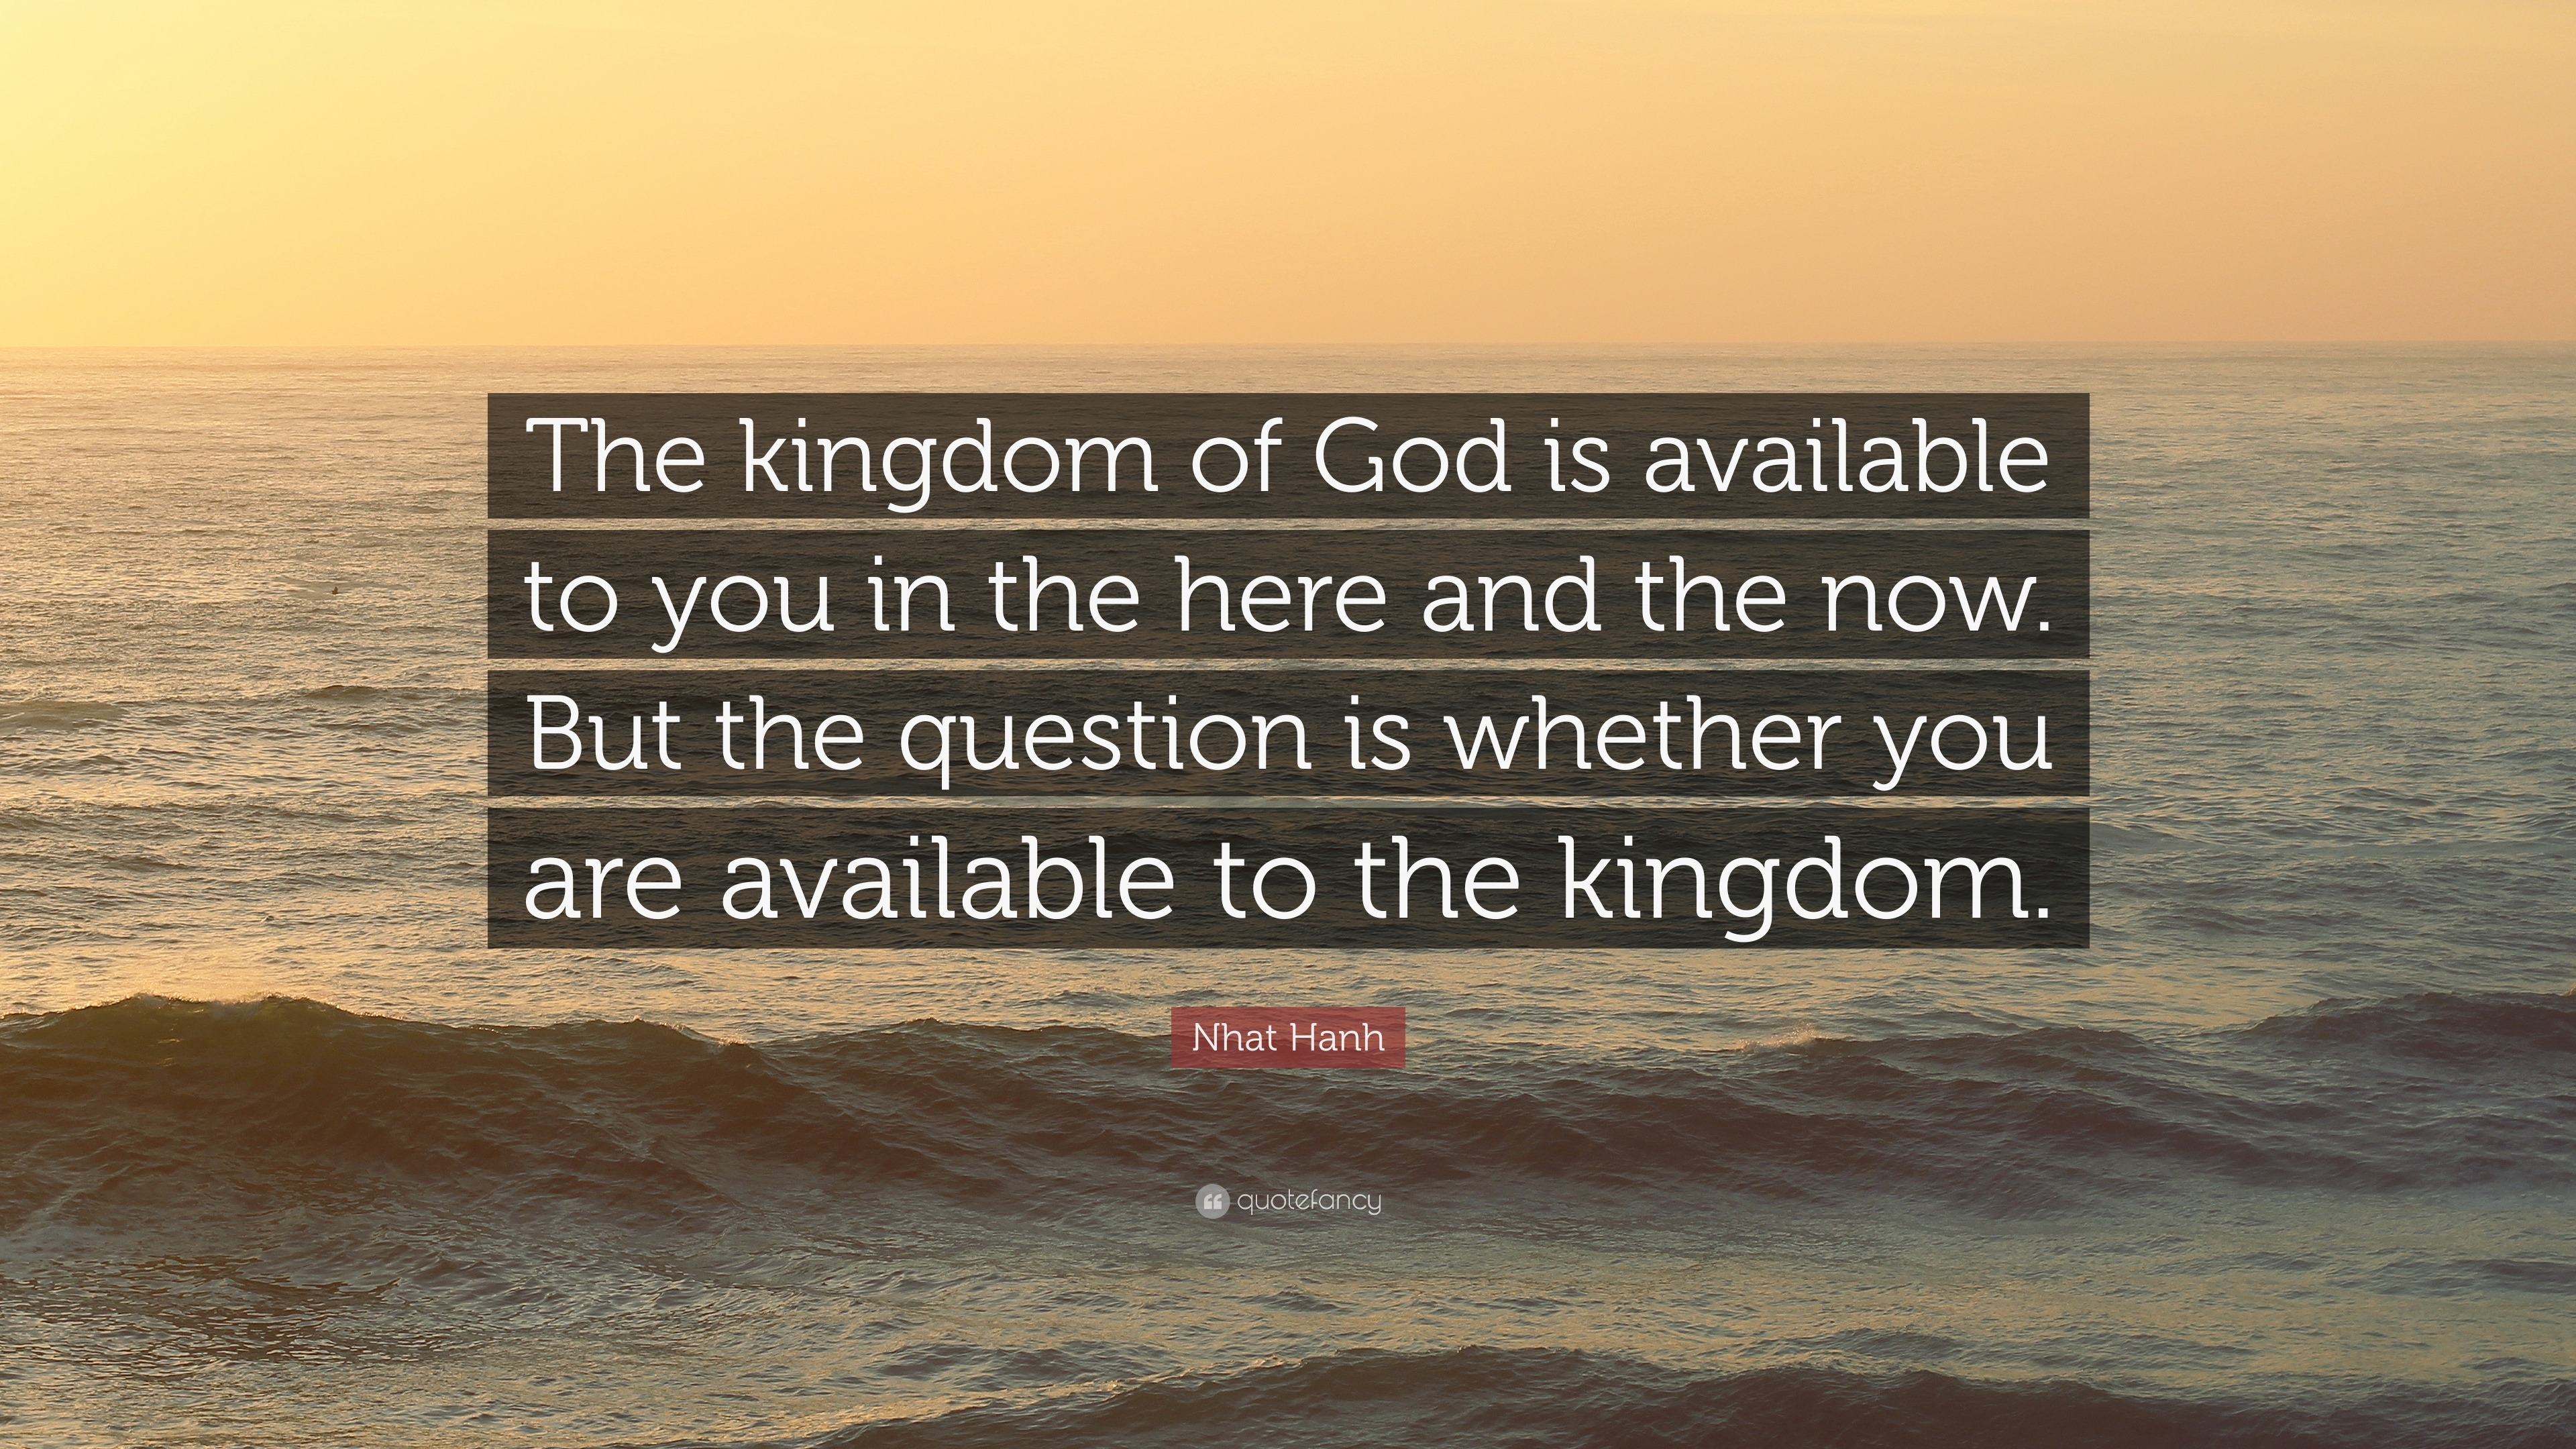 Nhat Hanh Quote: “The kingdom of God is available to you in the here